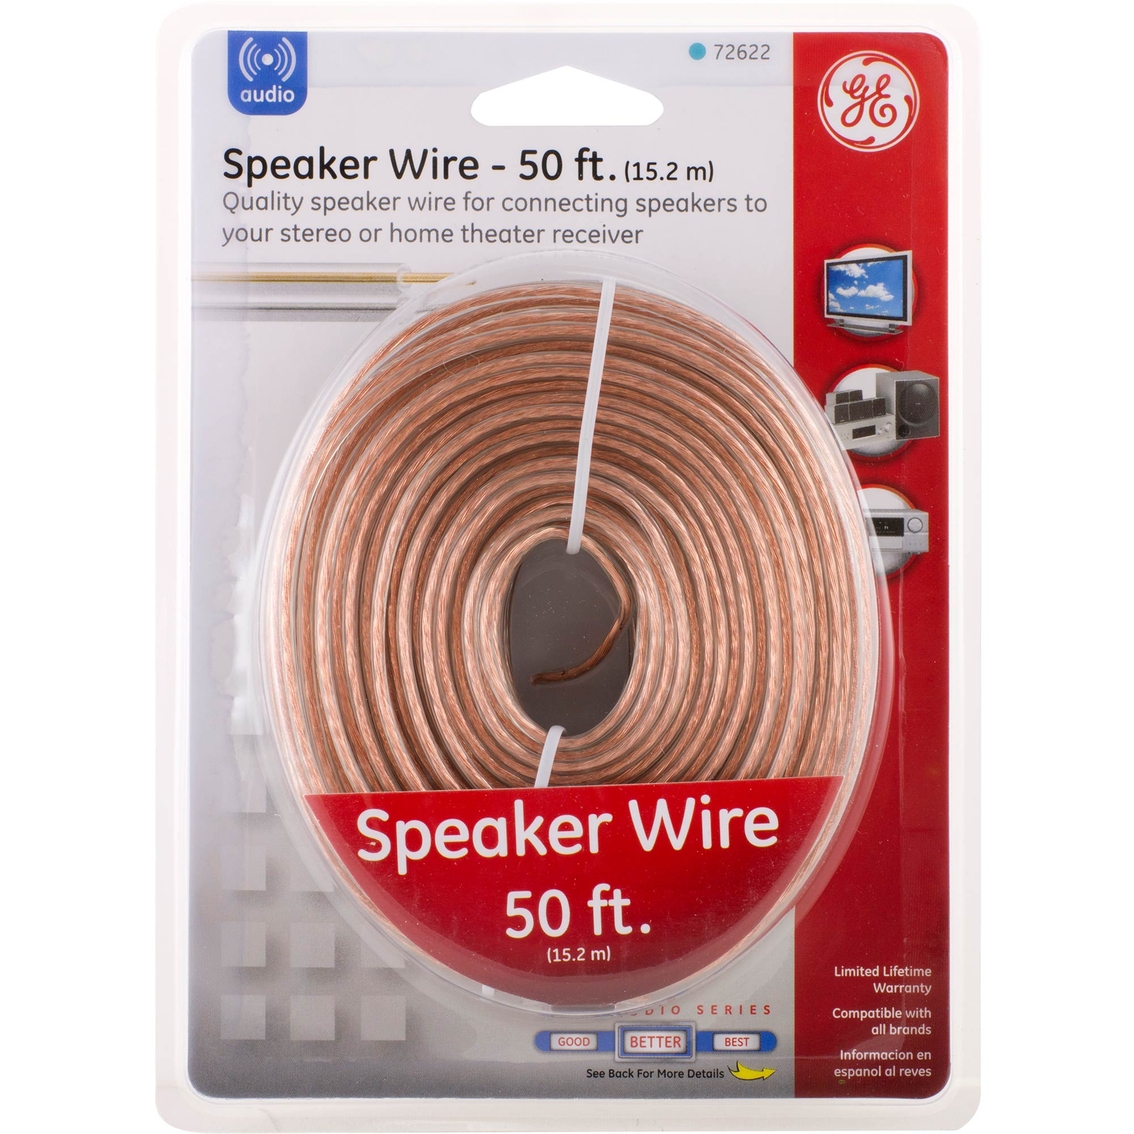 GE 50 ft. Home Audio Series Speaker Wire - Image 2 of 2